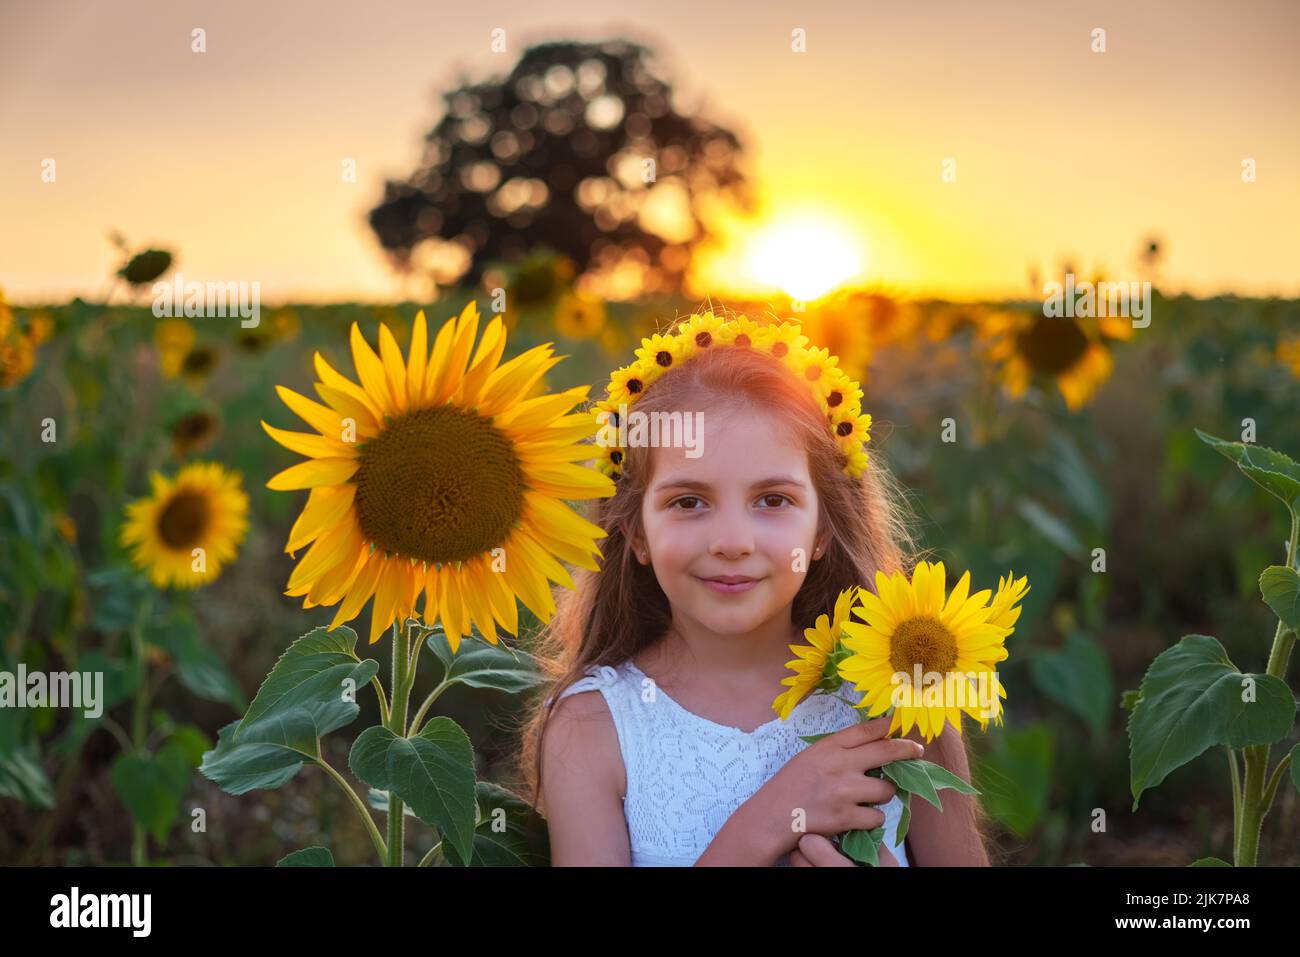 Girl and sunflowers in sunflower field during sunset. Agriculture, farming, childhood and carefree concept. Stock Photo